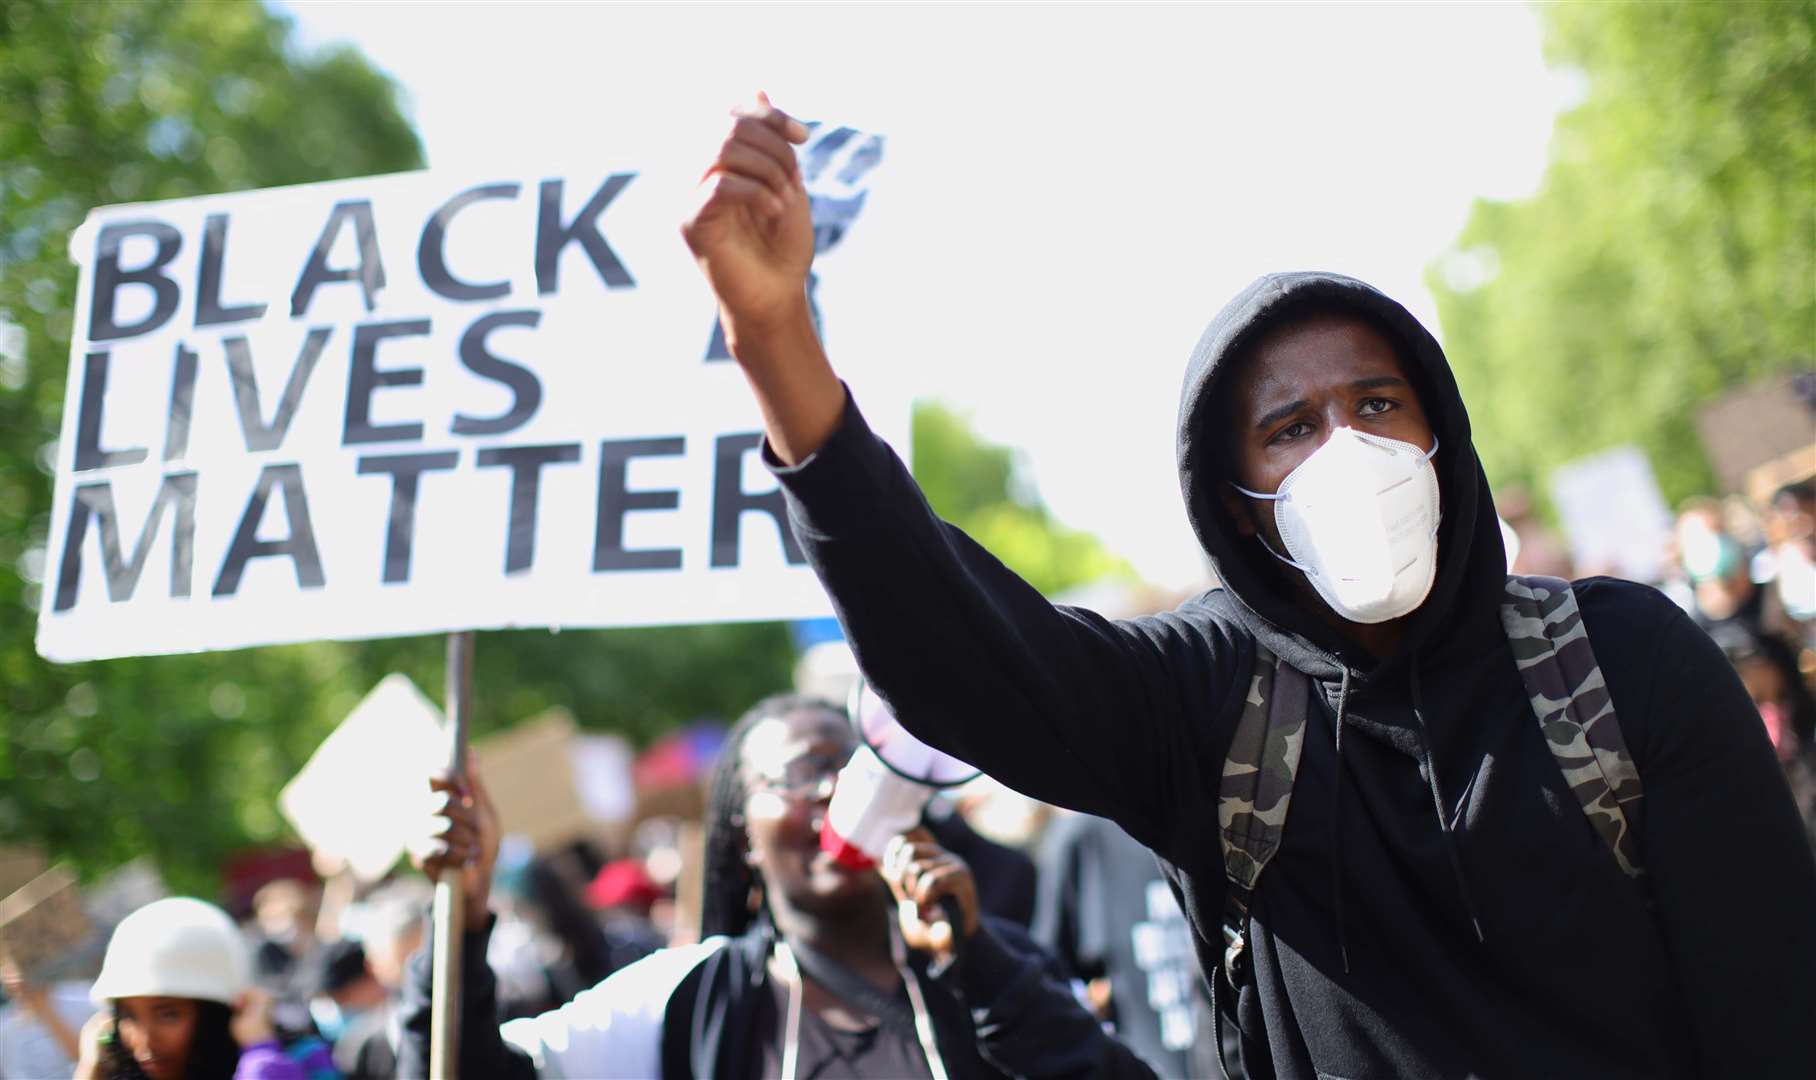 A Black Lives Matter rally in Hyde Park, London (Aaron Chown/PA)